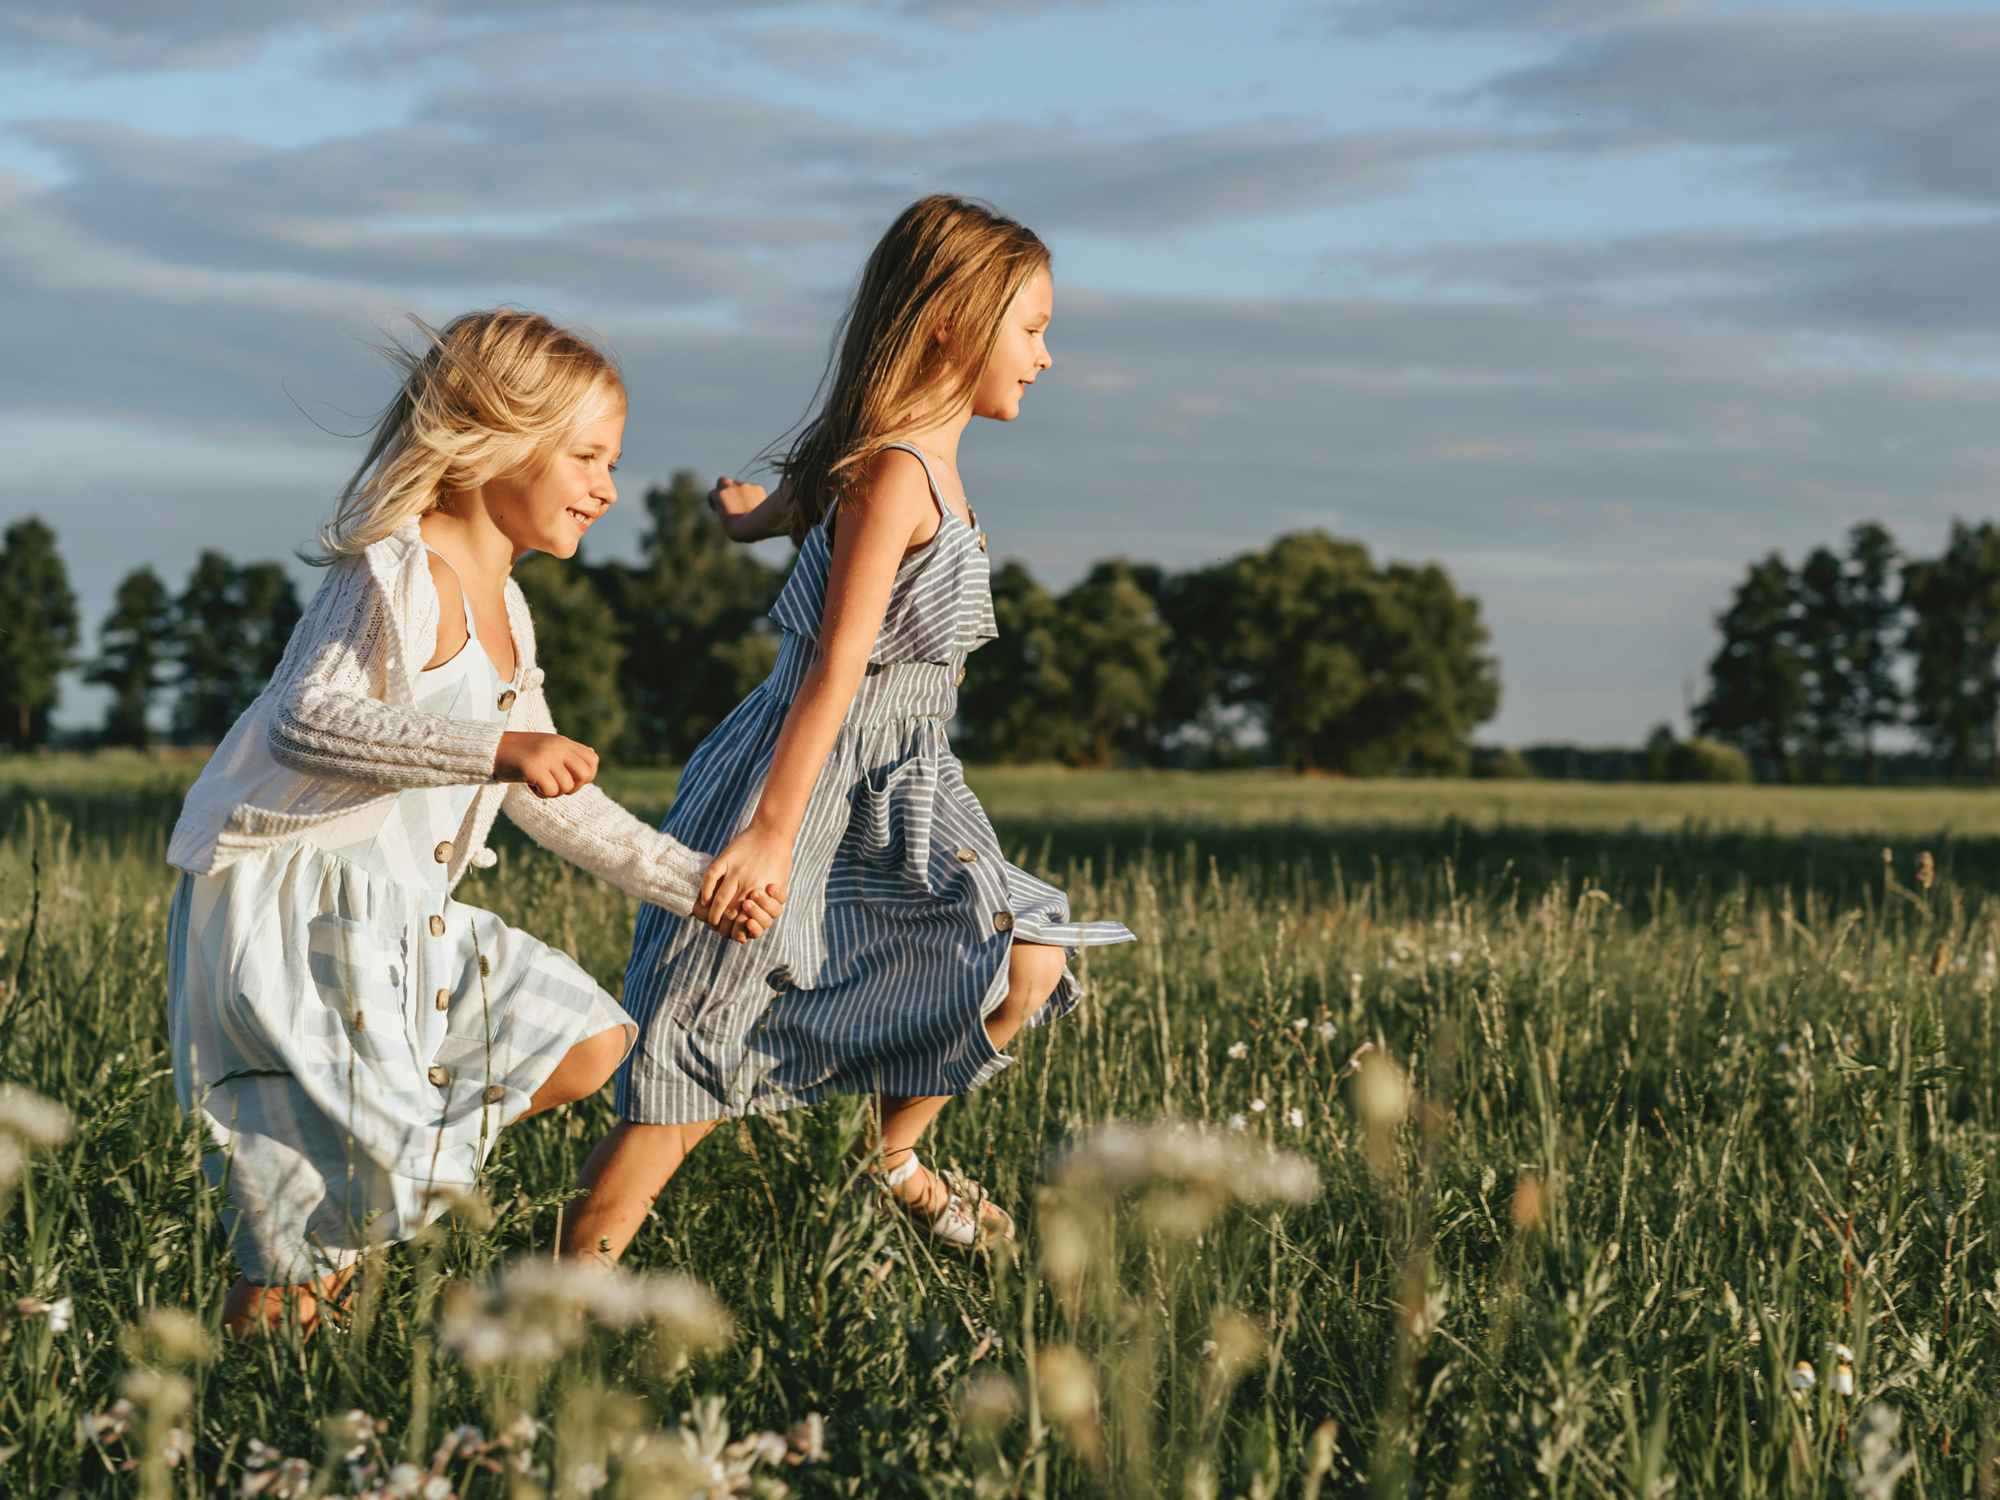 two girls in dresses running in a field